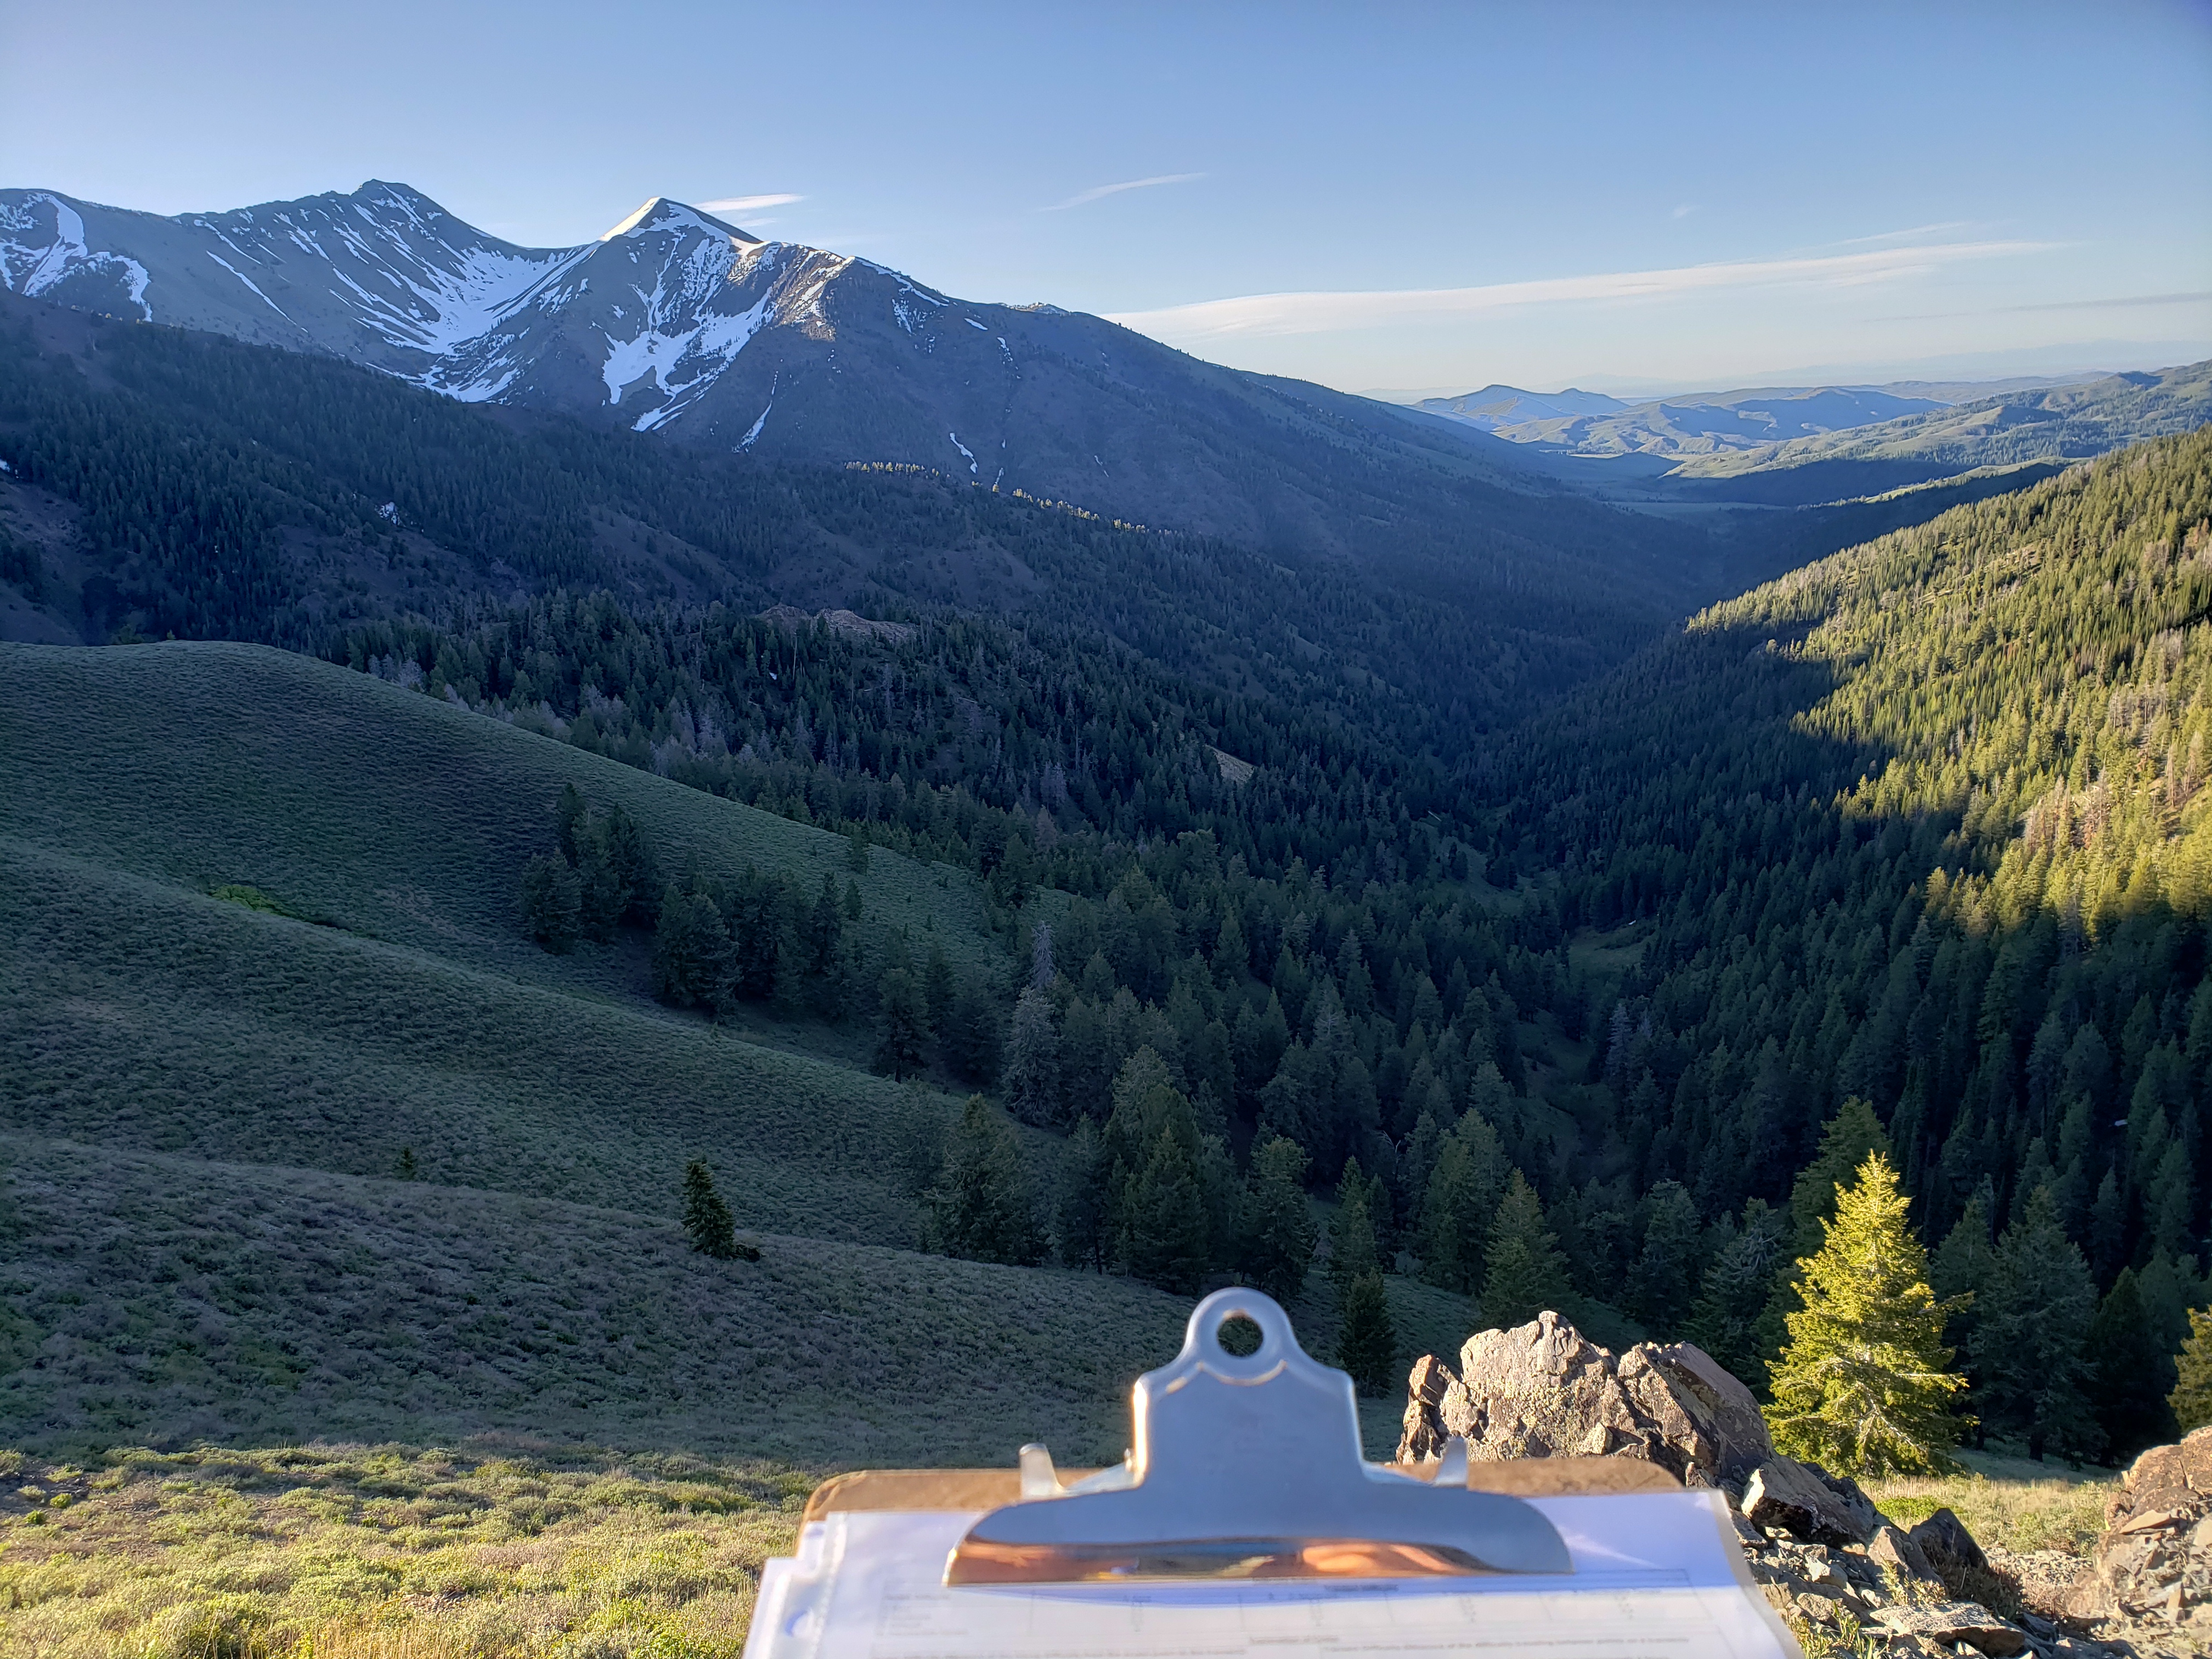 part of a clipboard and data sheet are visible in the foreground. Sagebrush hills, forest, and snowy mountains show in the background